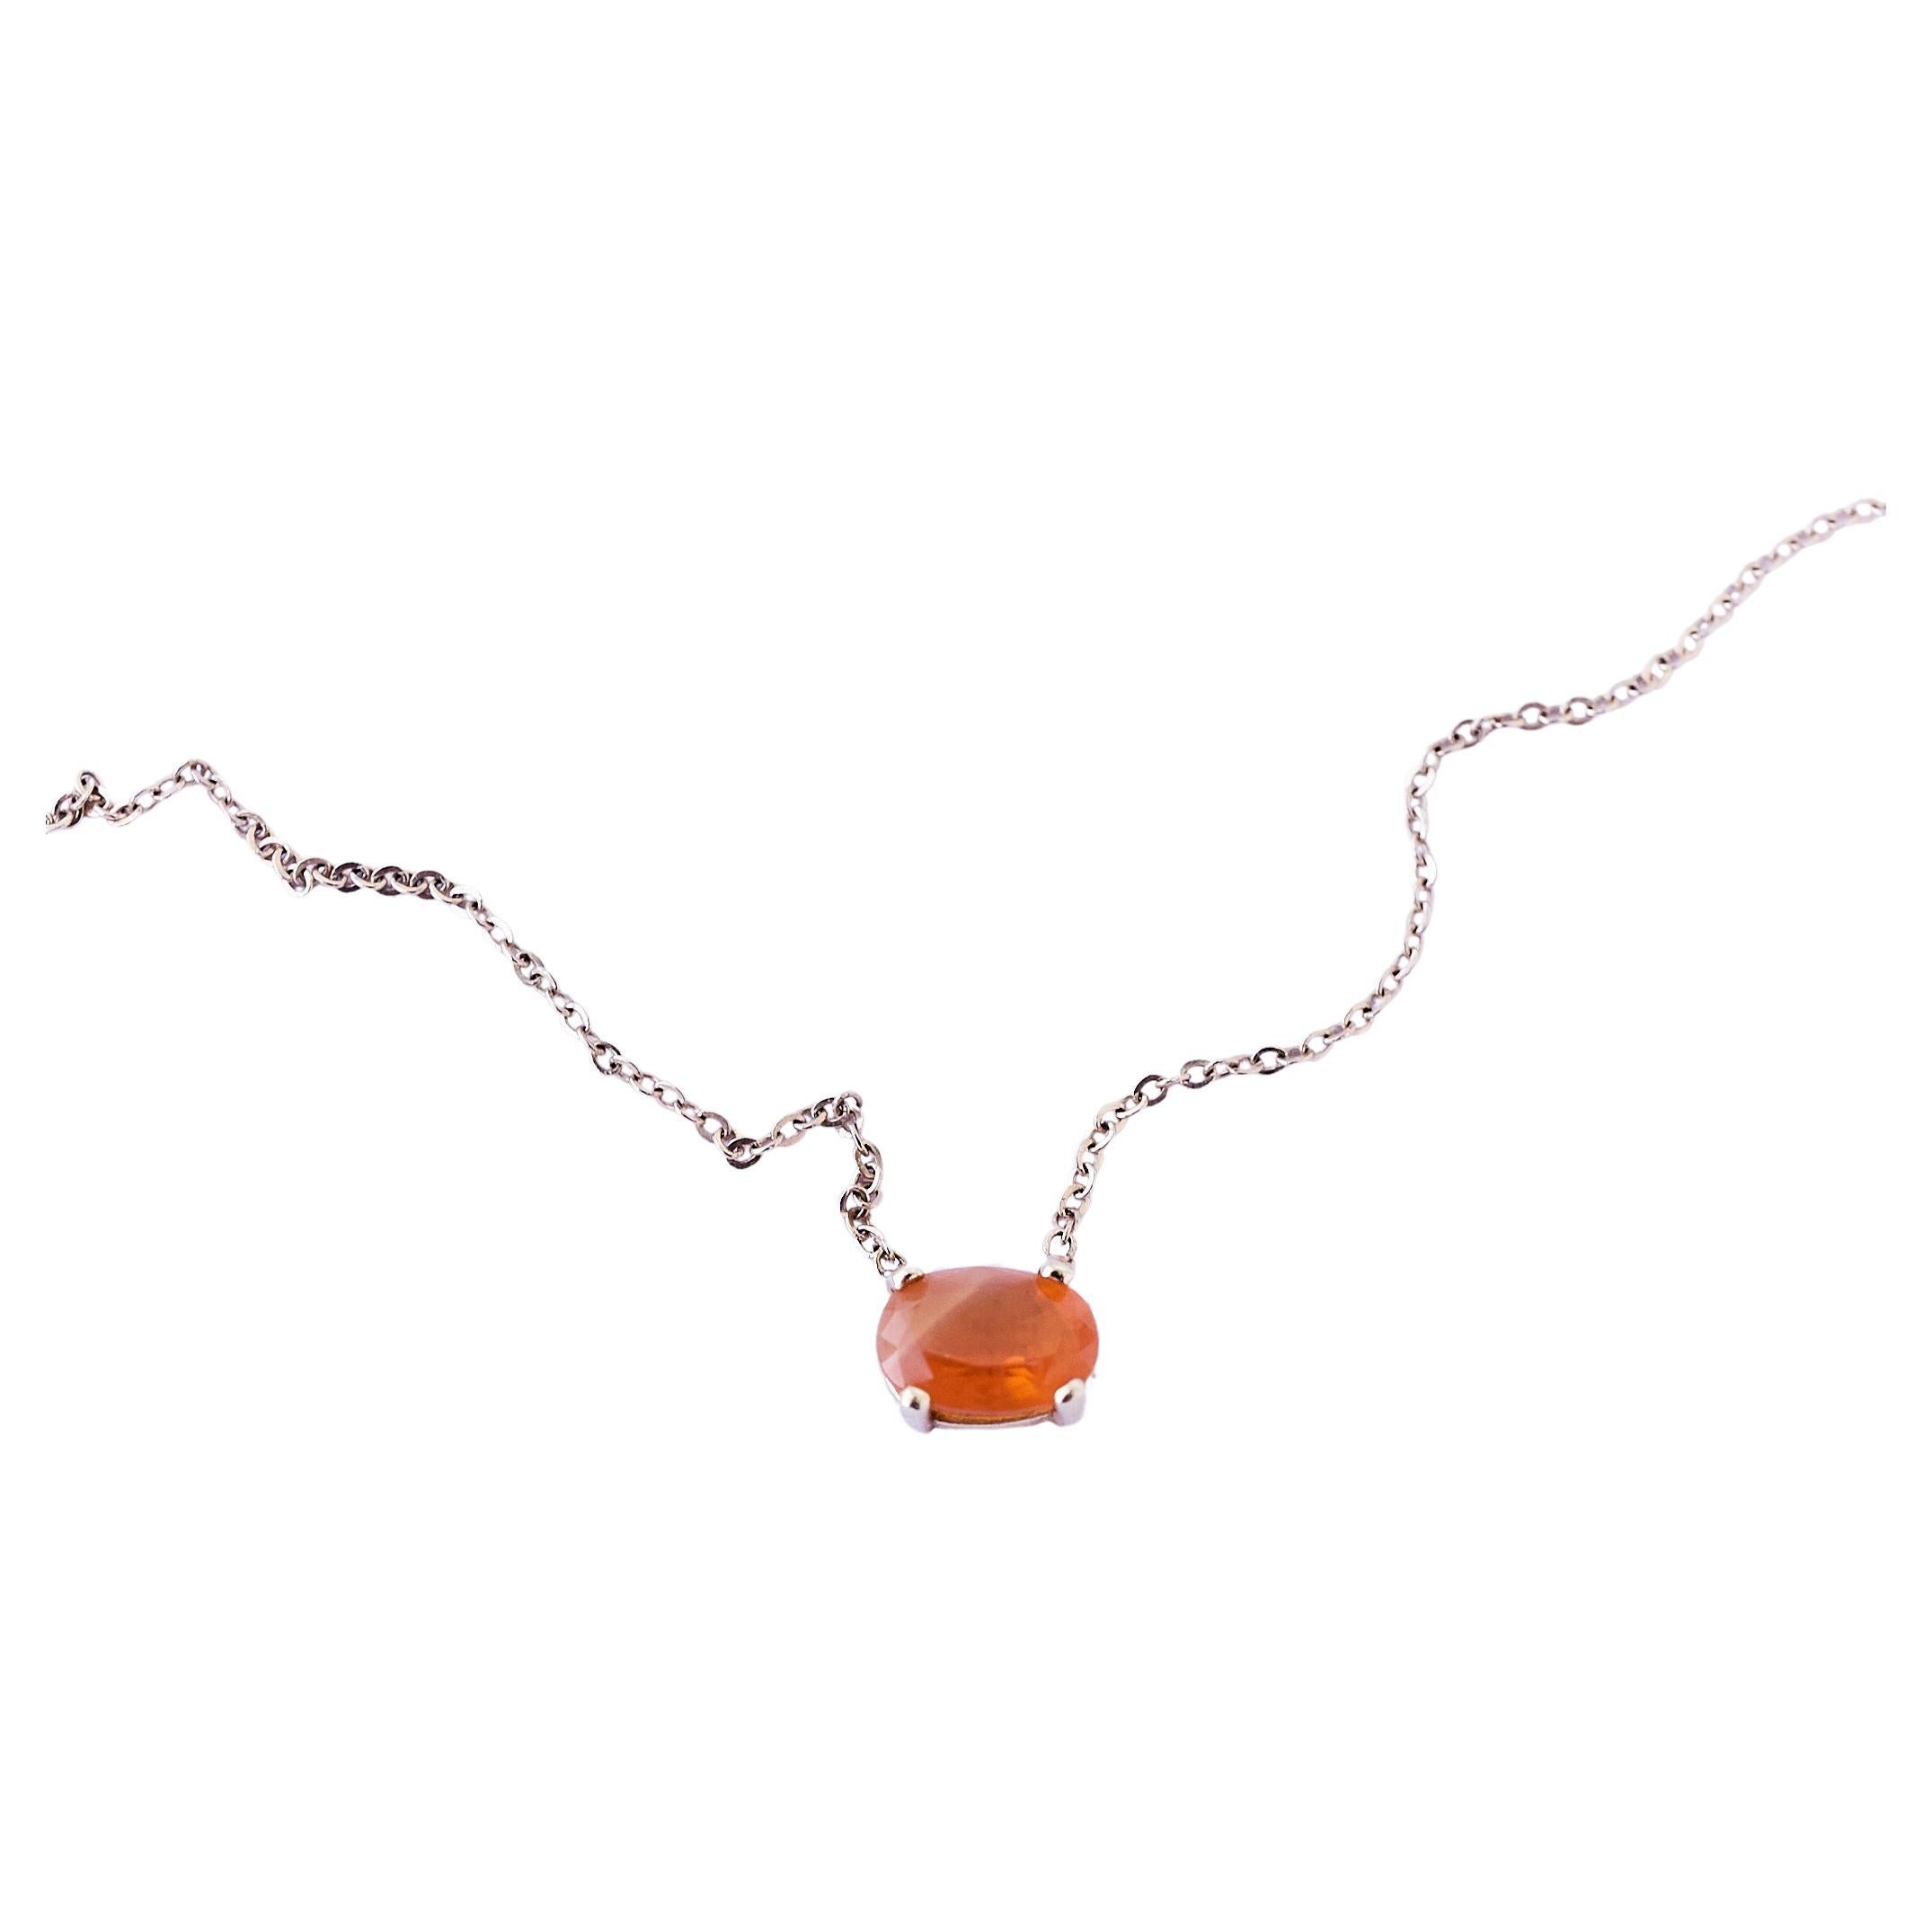 Fire Opal Gold Chain Necklace Choker J Dauphin For Sale